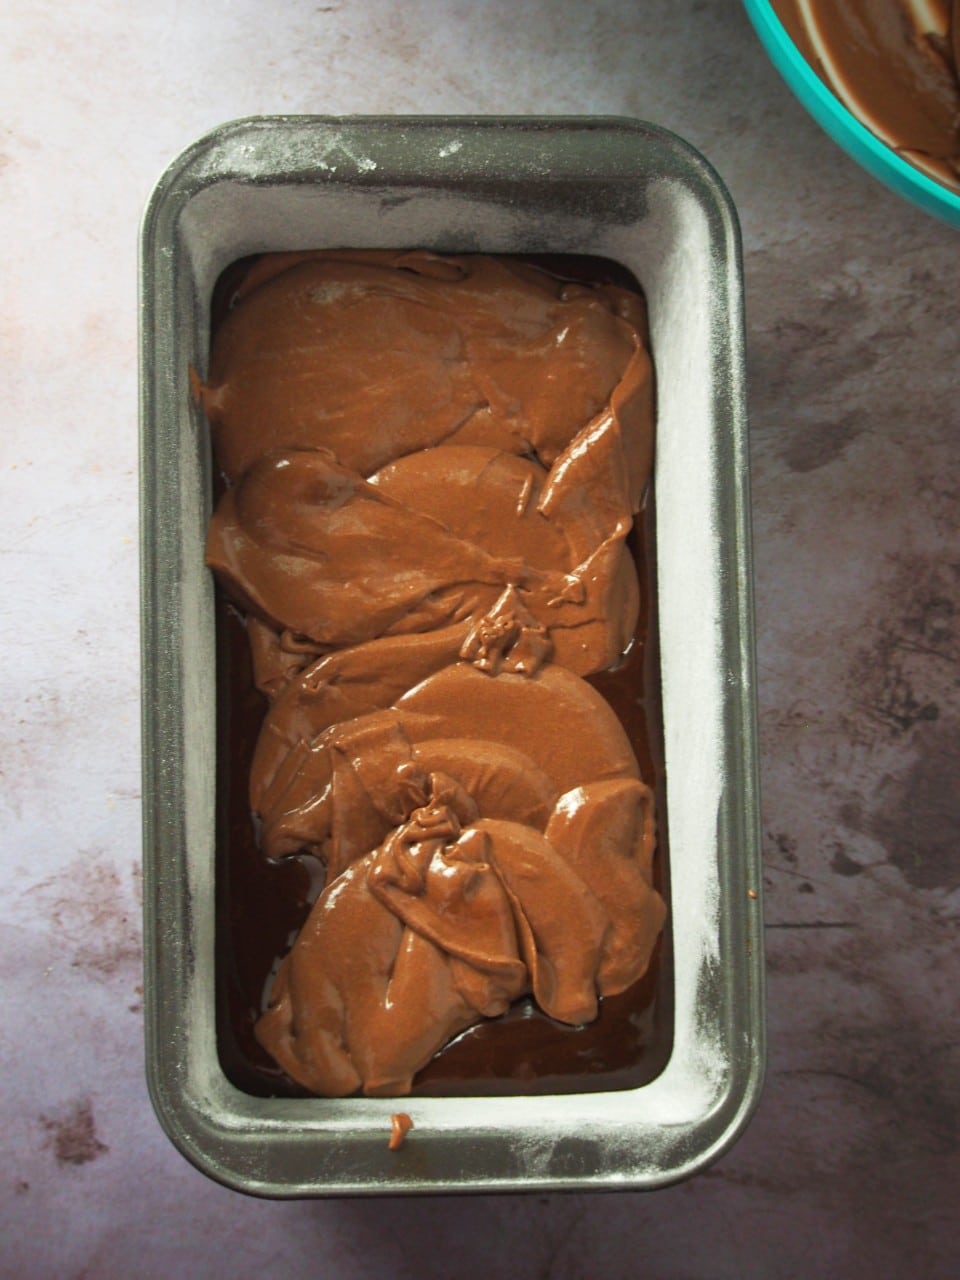 Layering of the chocolate batters in the ombre chocolate cake.